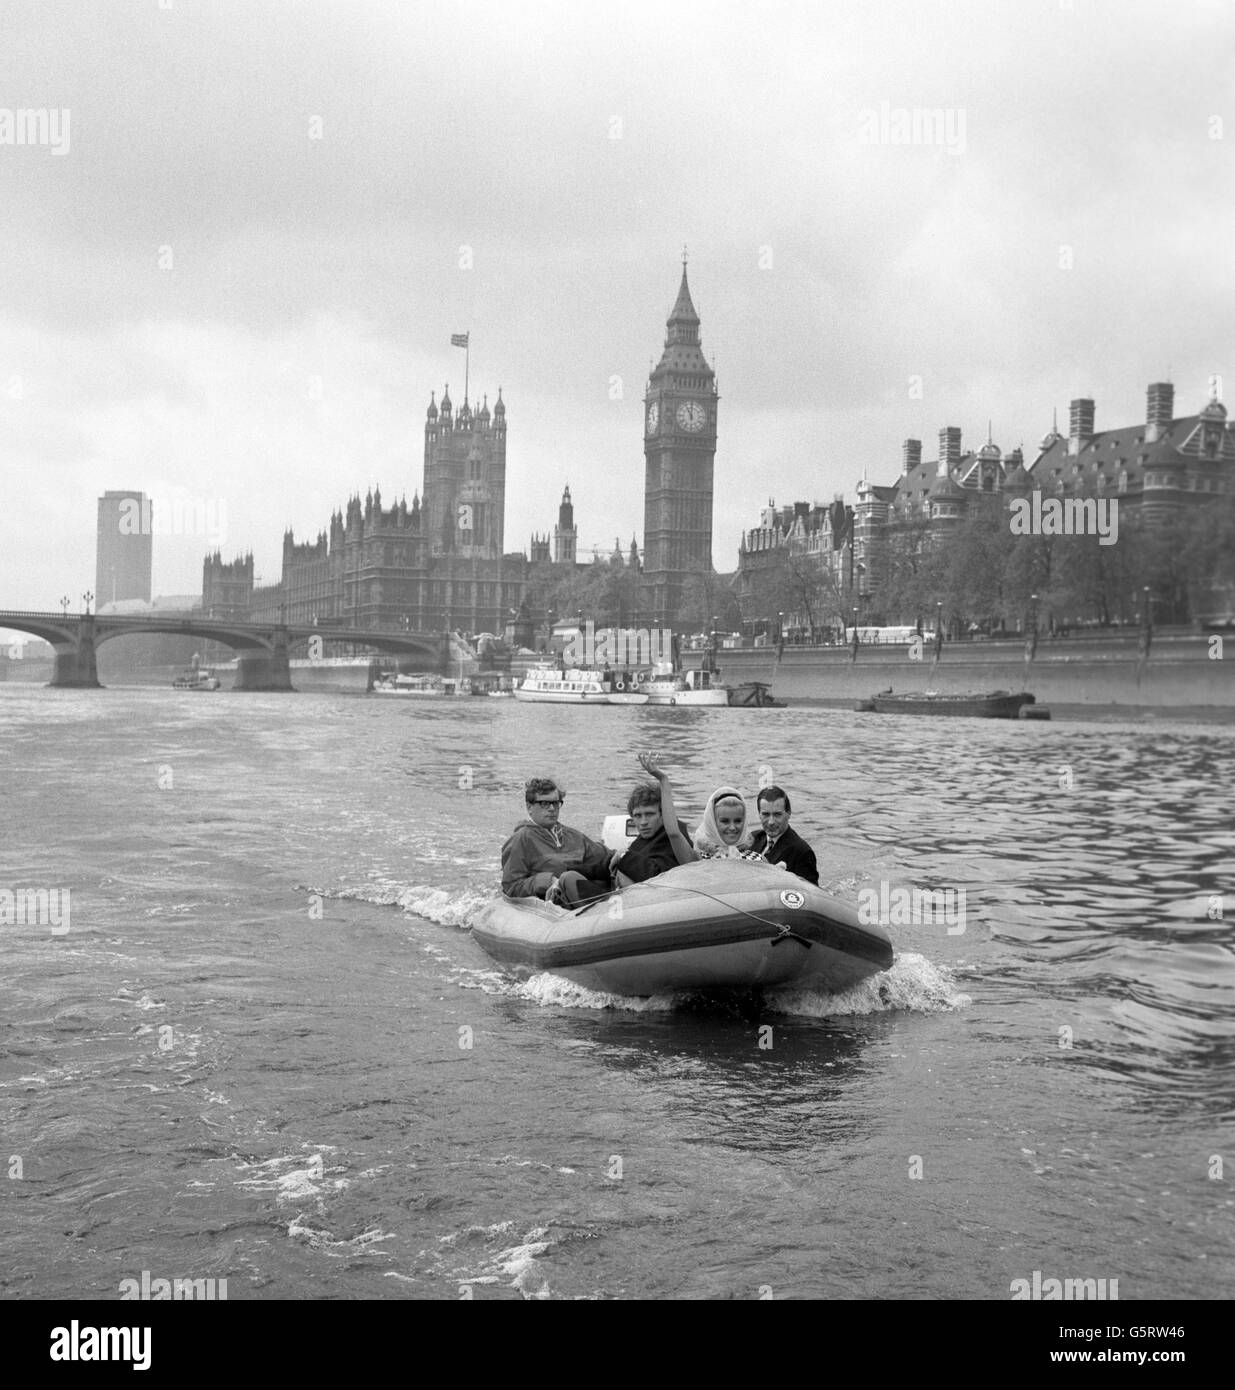 Scotsman Dougal Haston, conqueror of the Eiger (second from left) has Lesley Langley (Miss World) and Labour MP Mr Michael English (Nottingham W.) - on right - as companions on the trip by inflatable speedboat from Westminster to Charing Cross where Lasley opened the National Camping Week exhibition. Paul Ailey drives the boat, which has a top speed of over 50 knots. The exhibition is the prelude to Nationsl Camping Week. Lesley is a former Miss Camping. Stock Photo